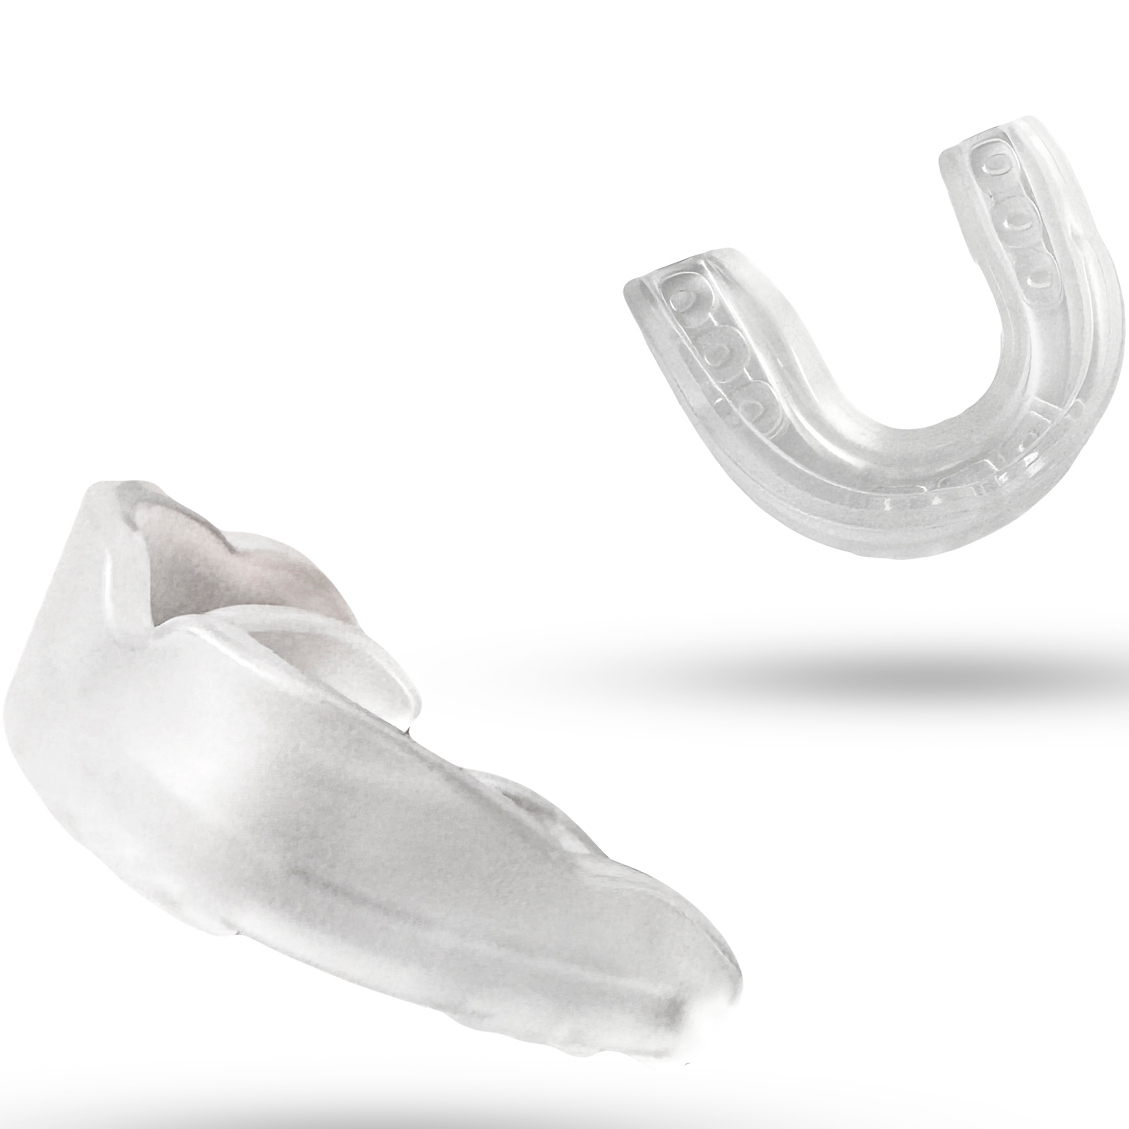  Капа Infinite Force Mouth Guard Transparent  